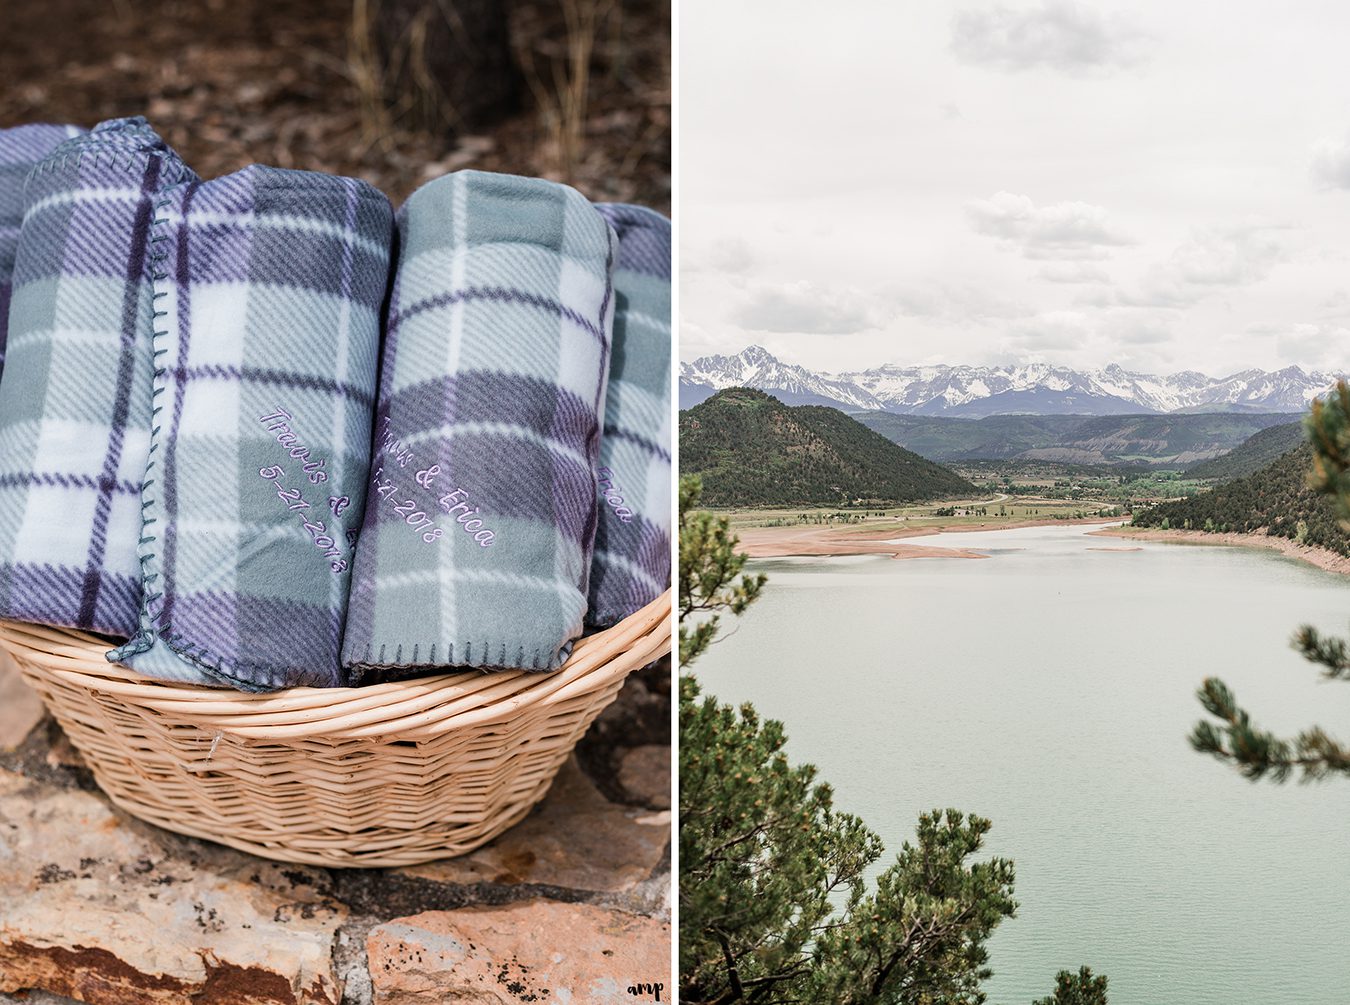 Customized purple plaid blankets reading Travis & Erica - 5.21.18 and the San Jaun mountain range from Ridgway State Park